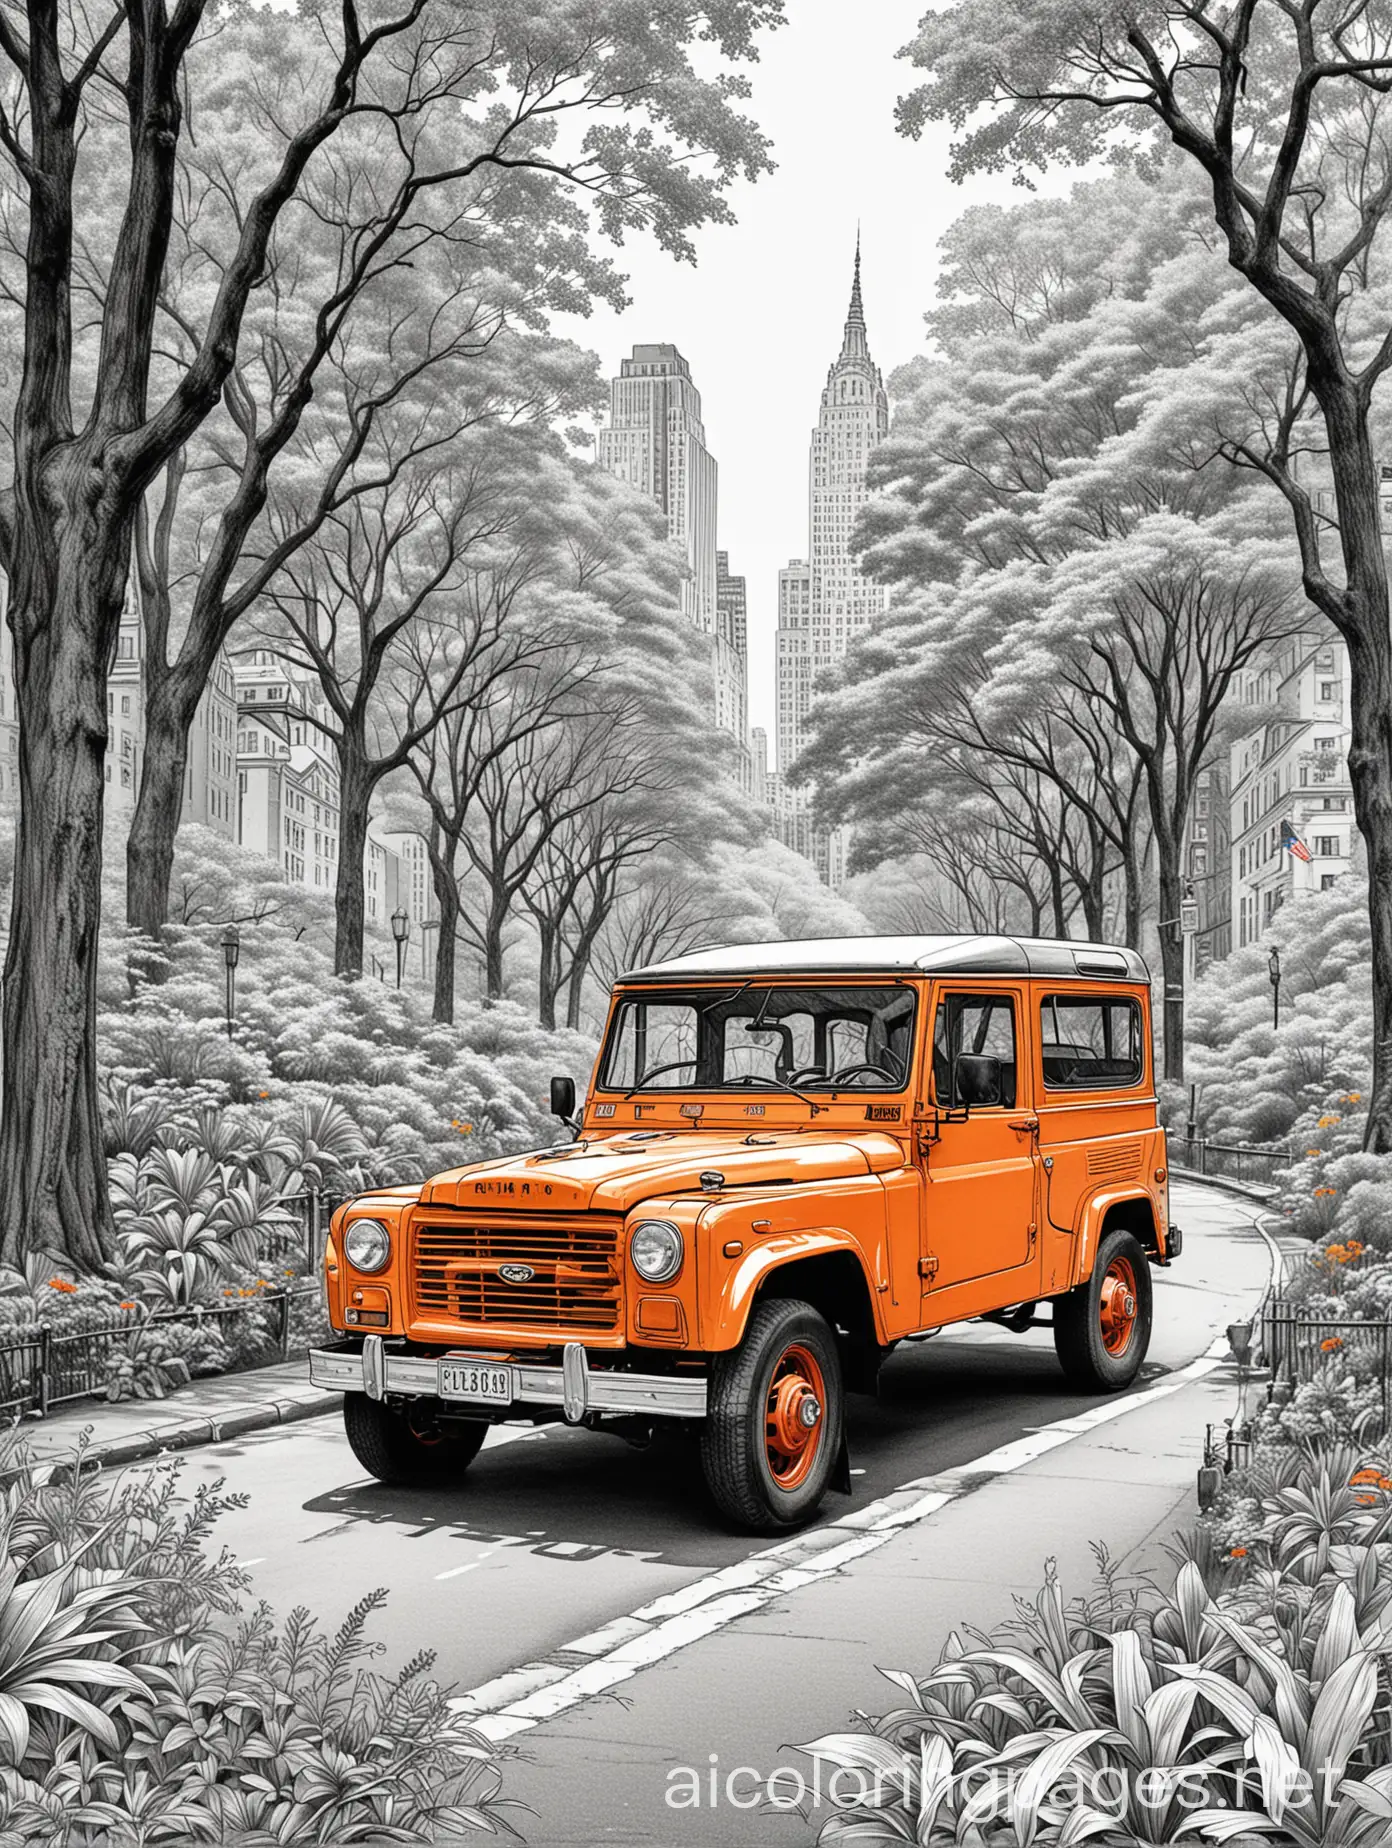 create book cover with vector drawing scratches and detailed lines colorful and realistic, of classic old and iconic vehicles in the streets central park in old New York, A4 paper size, vector lines with vegetation background, coconut trees, trees, flowers very colorful and beautiful, Coloring Page, black and white, line art, white background, Simplicity, Ample White Space. The background of the coloring page is plain white to make it easy for young children to color within the lines. The outlines of all the subjects are easy to distinguish, making it simple for kids to color without too much difficulty